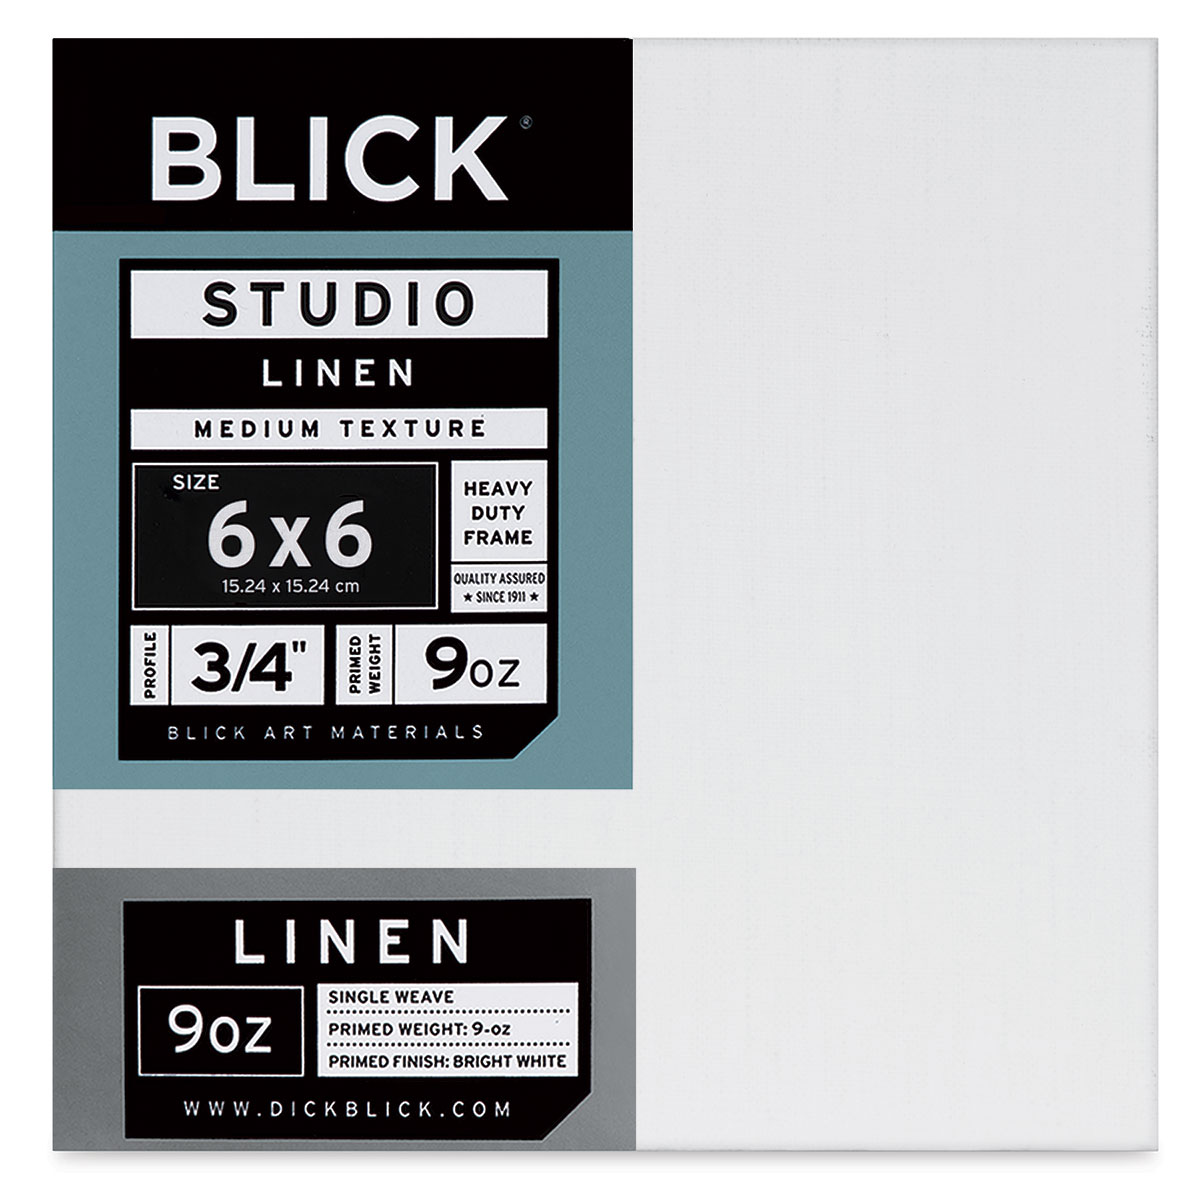 Blick Studio Linen Stretched Canvas - 18 x 24, Traditional 3/4